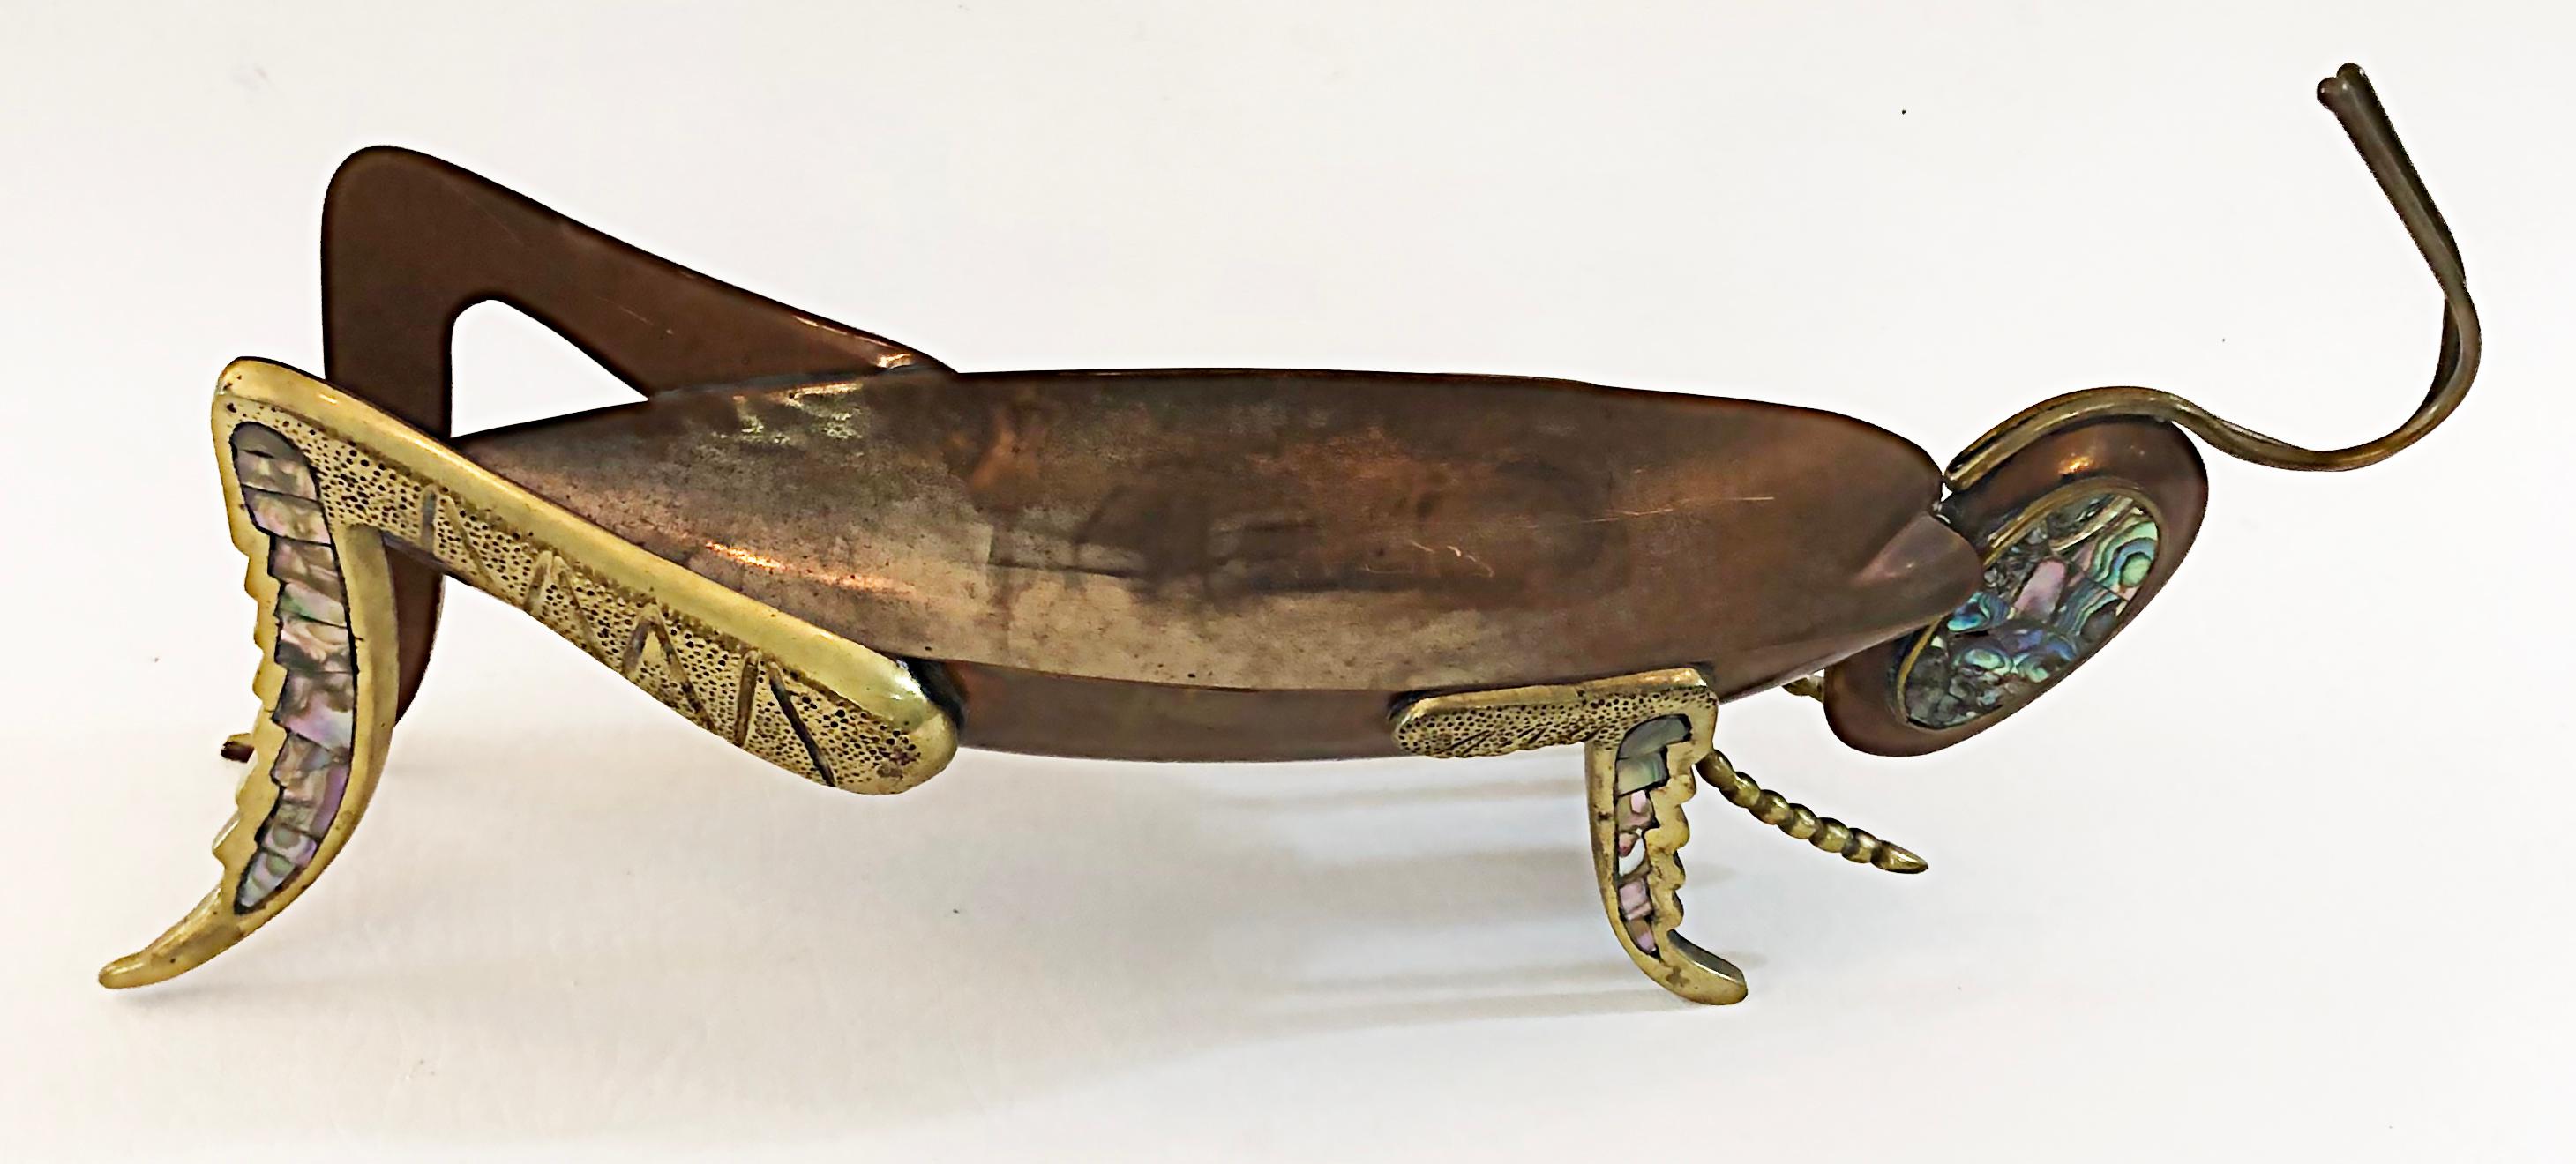 Los Castillo Metales Casados Mexico Abalone Cricket tray, 1950s

Offered for sale is a Los Castillo Metales Casados married metals cricket tray in copper and brass with inset abalone shells on the head and both front and back legs. The process to